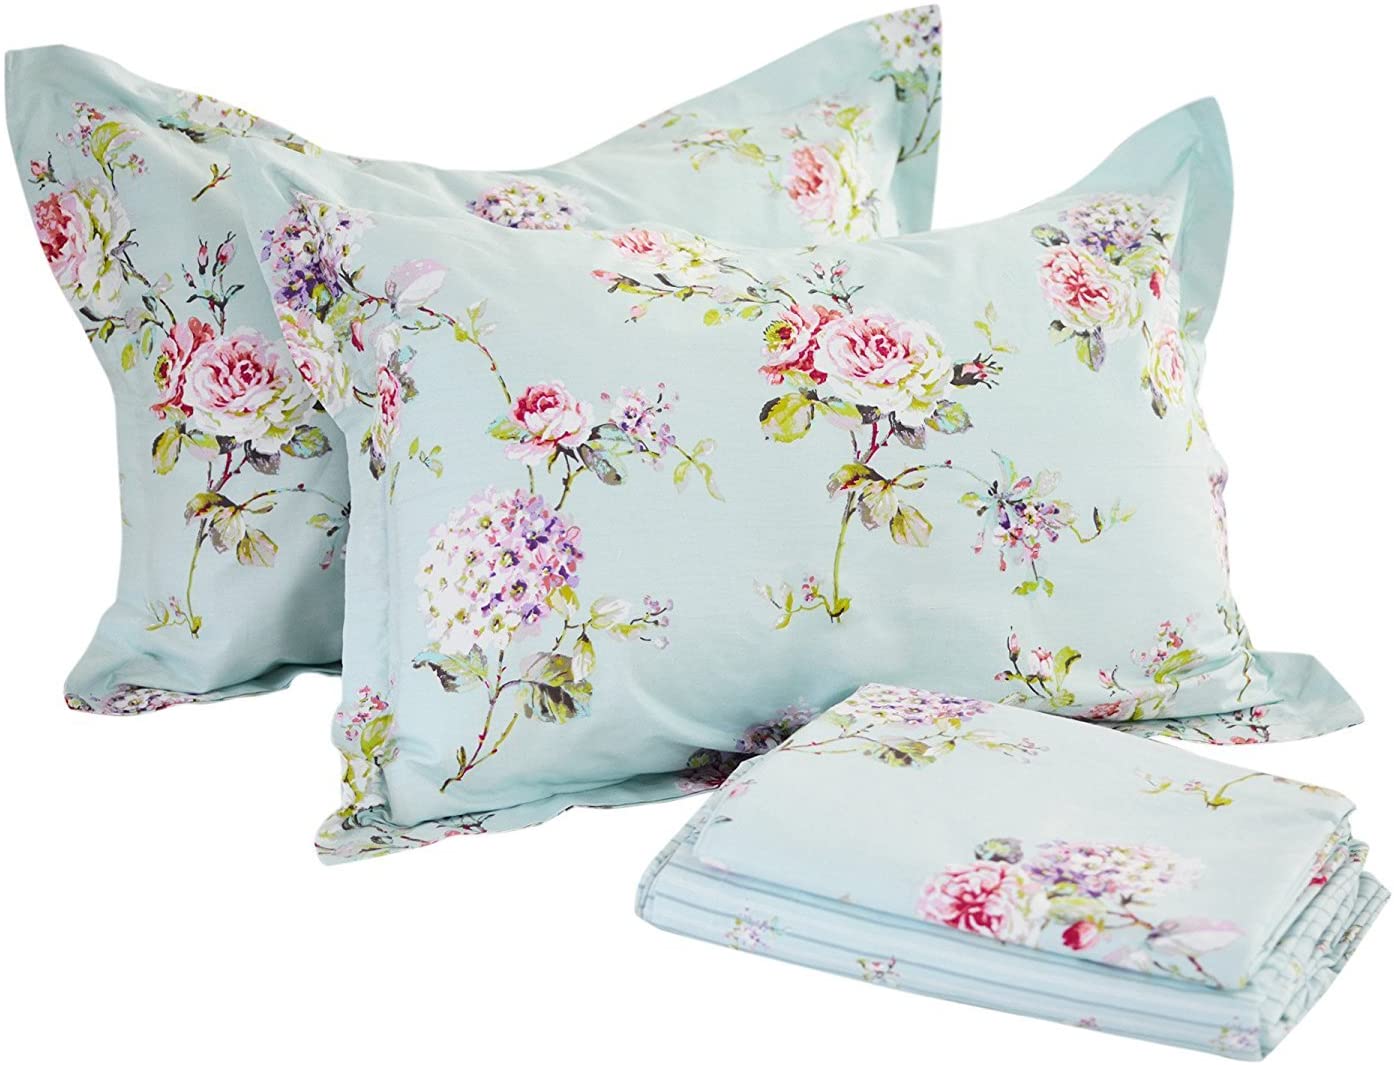 FADFAY Shabby Pink Floral 4 Piece Bed Sheet Set 100% Cotton Deep Pocket-Queen